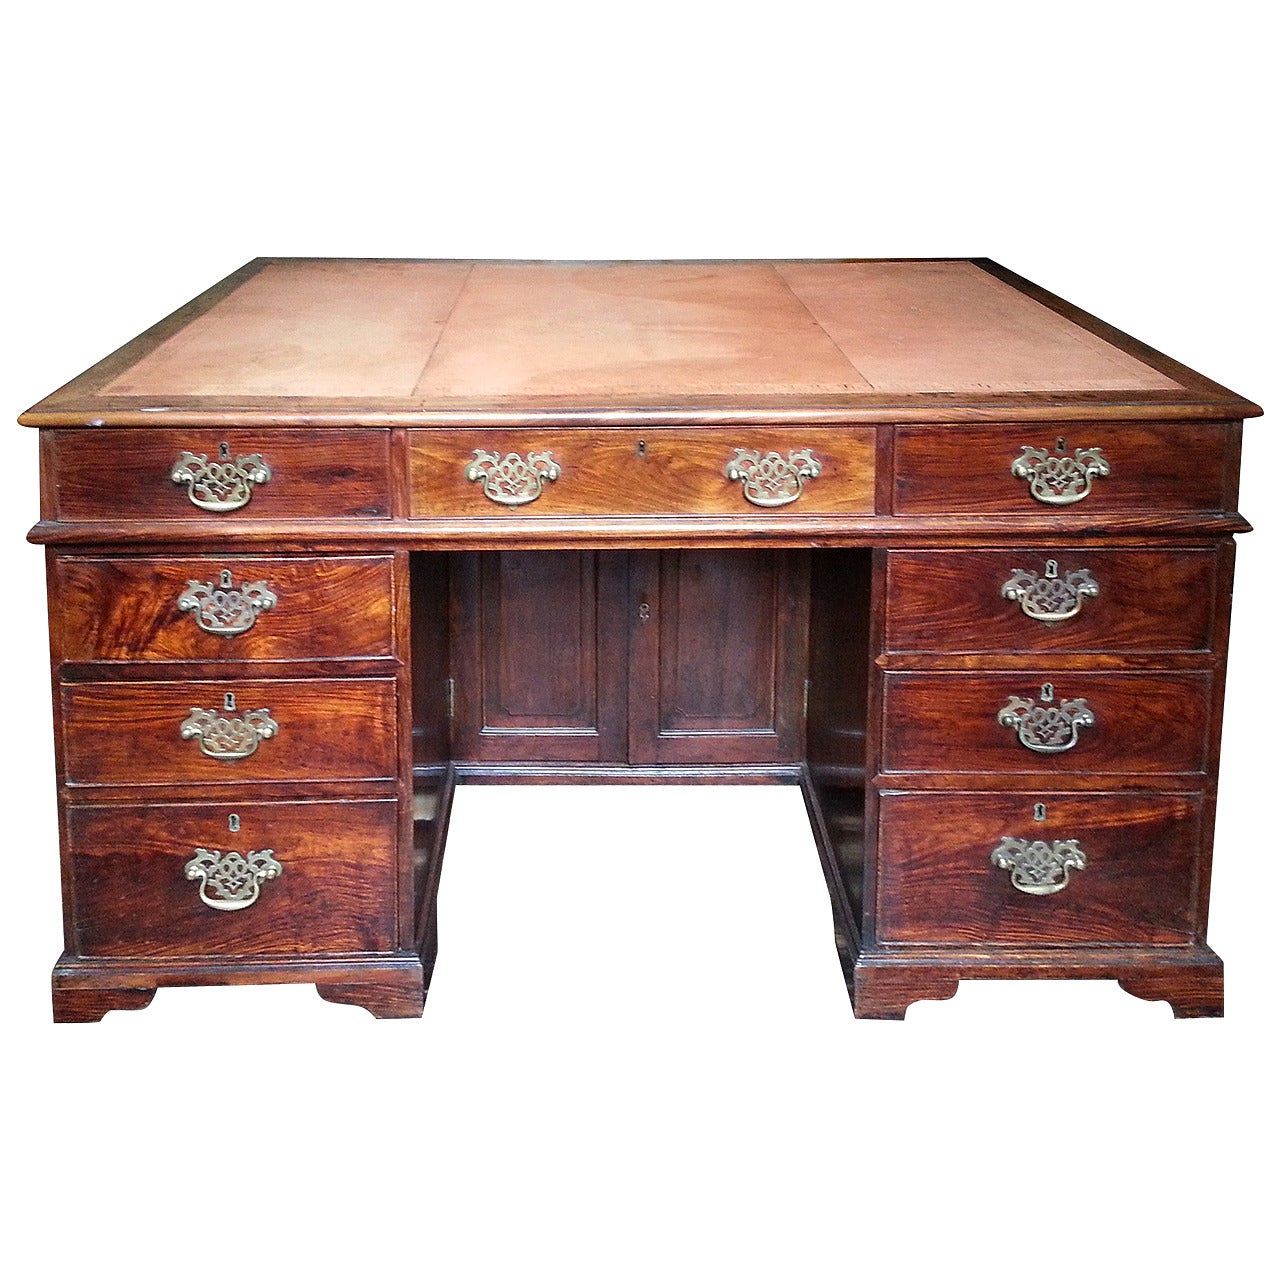 A Very Rare Mid-18th Century Huanghuali Wood Chinese Desk in the English Taste For Sale